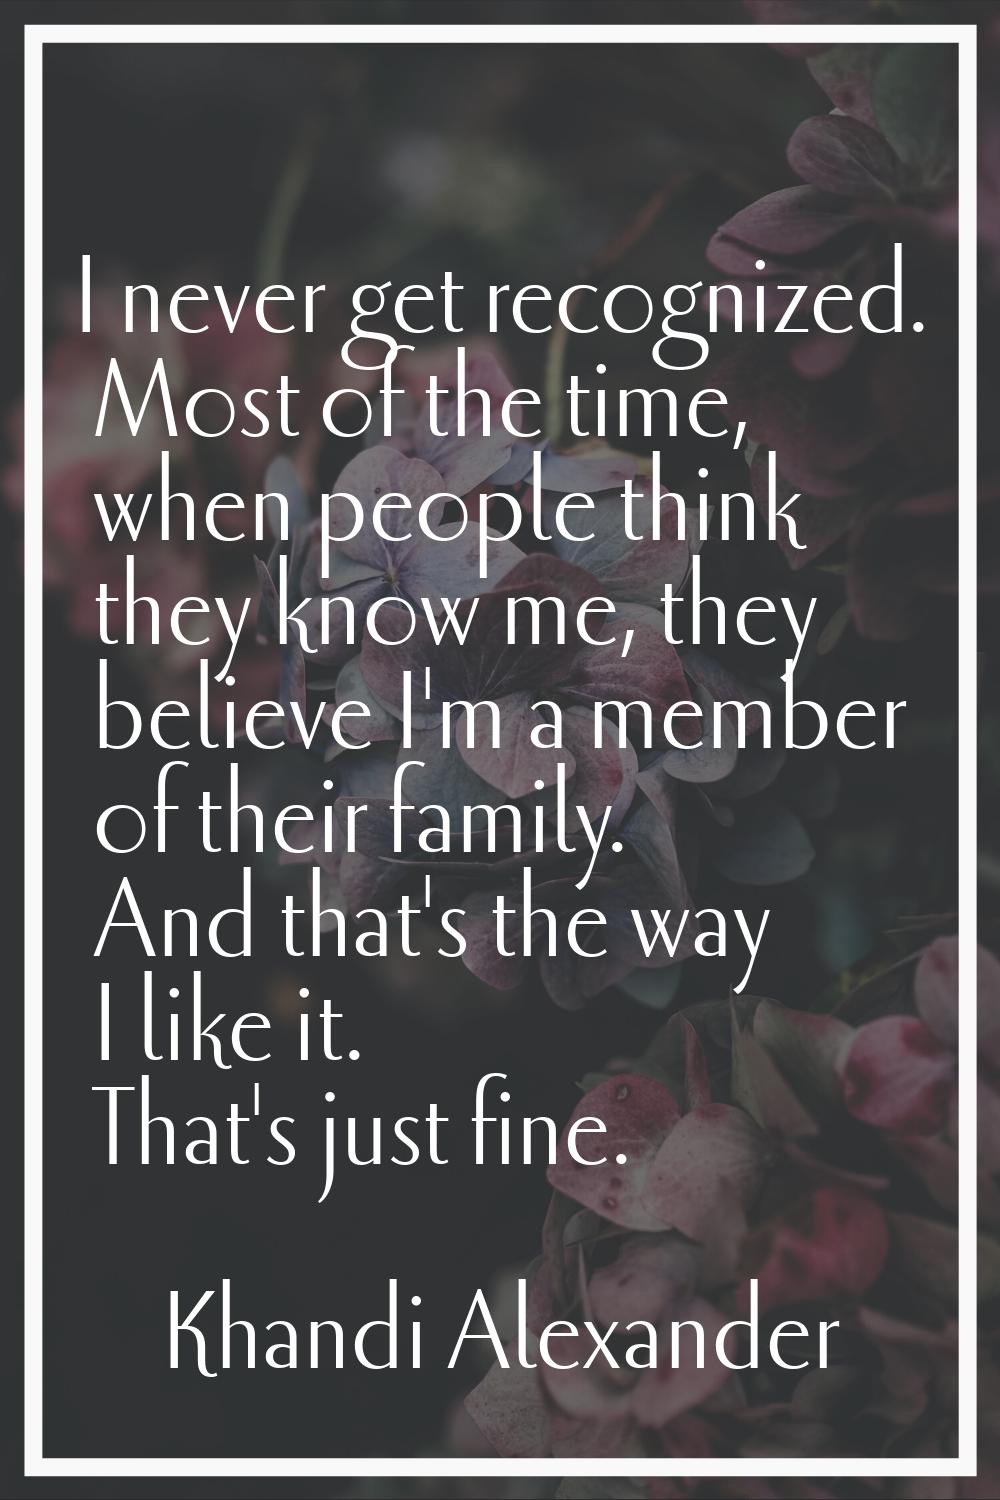 I never get recognized. Most of the time, when people think they know me, they believe I'm a member